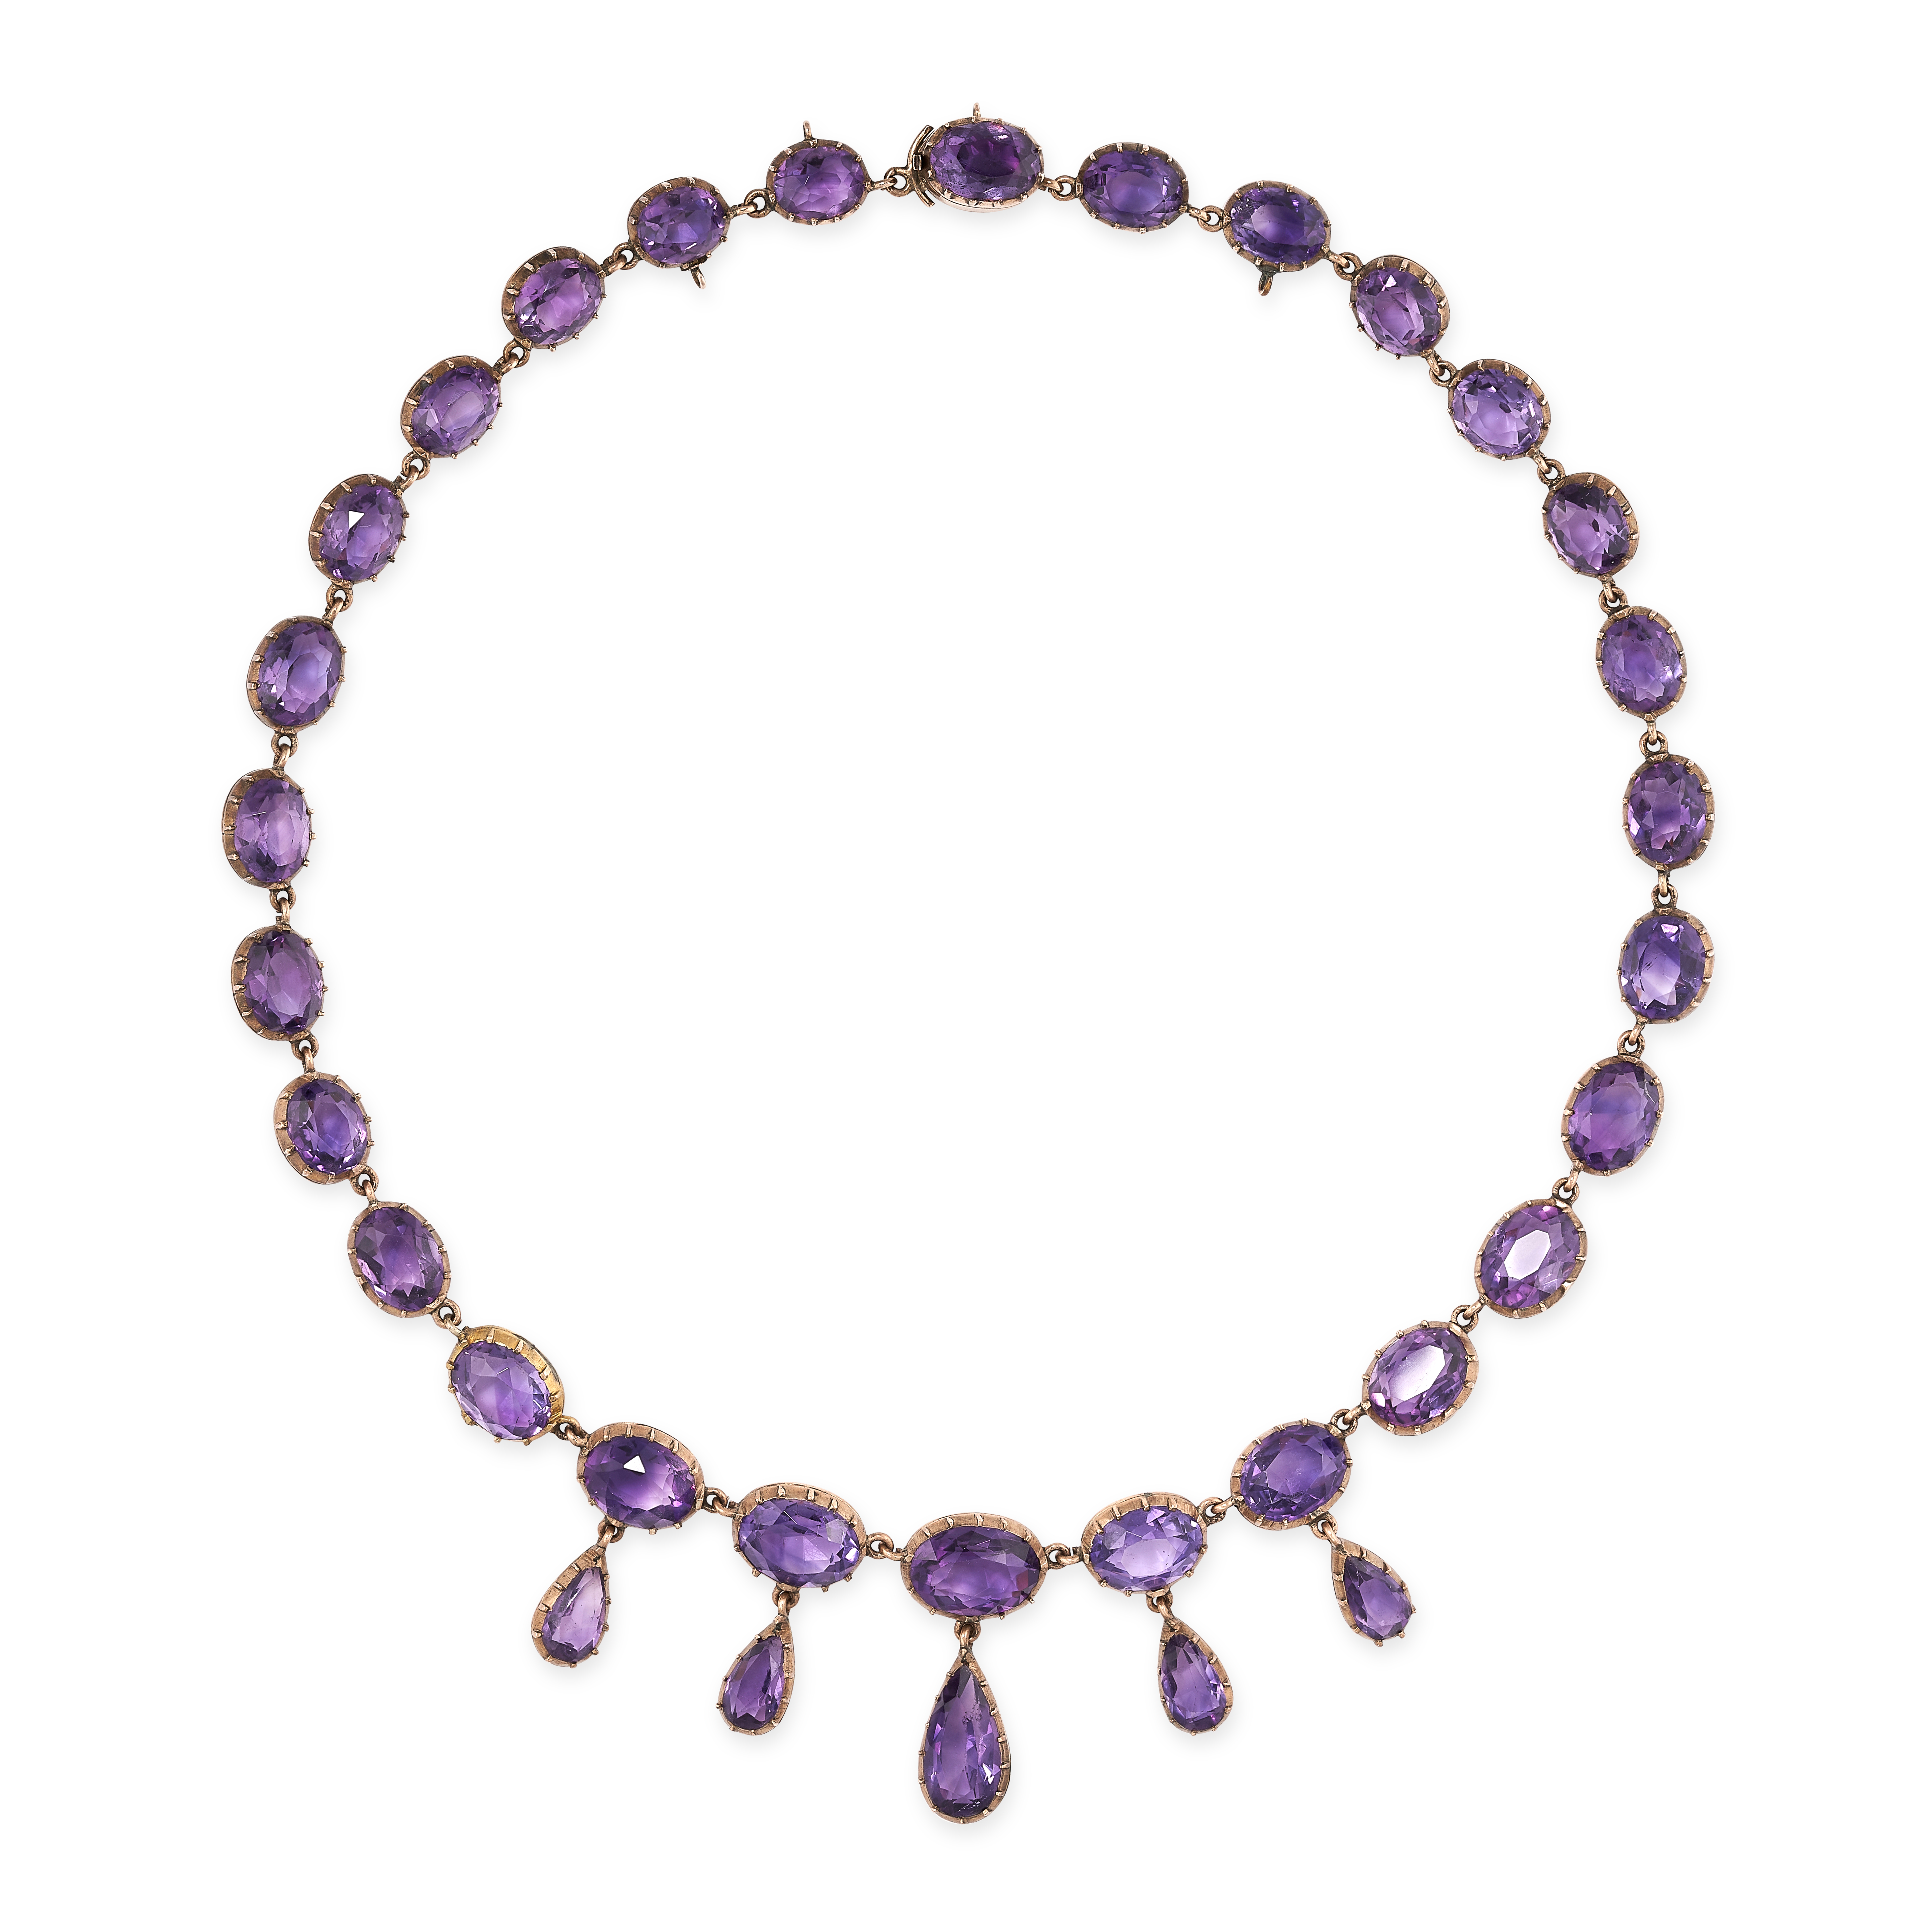 A FINE ANTIQUE AMETHYST RIVIERE NECKLACE, 19TH CENTURY in yellow gold, comprising a single row of